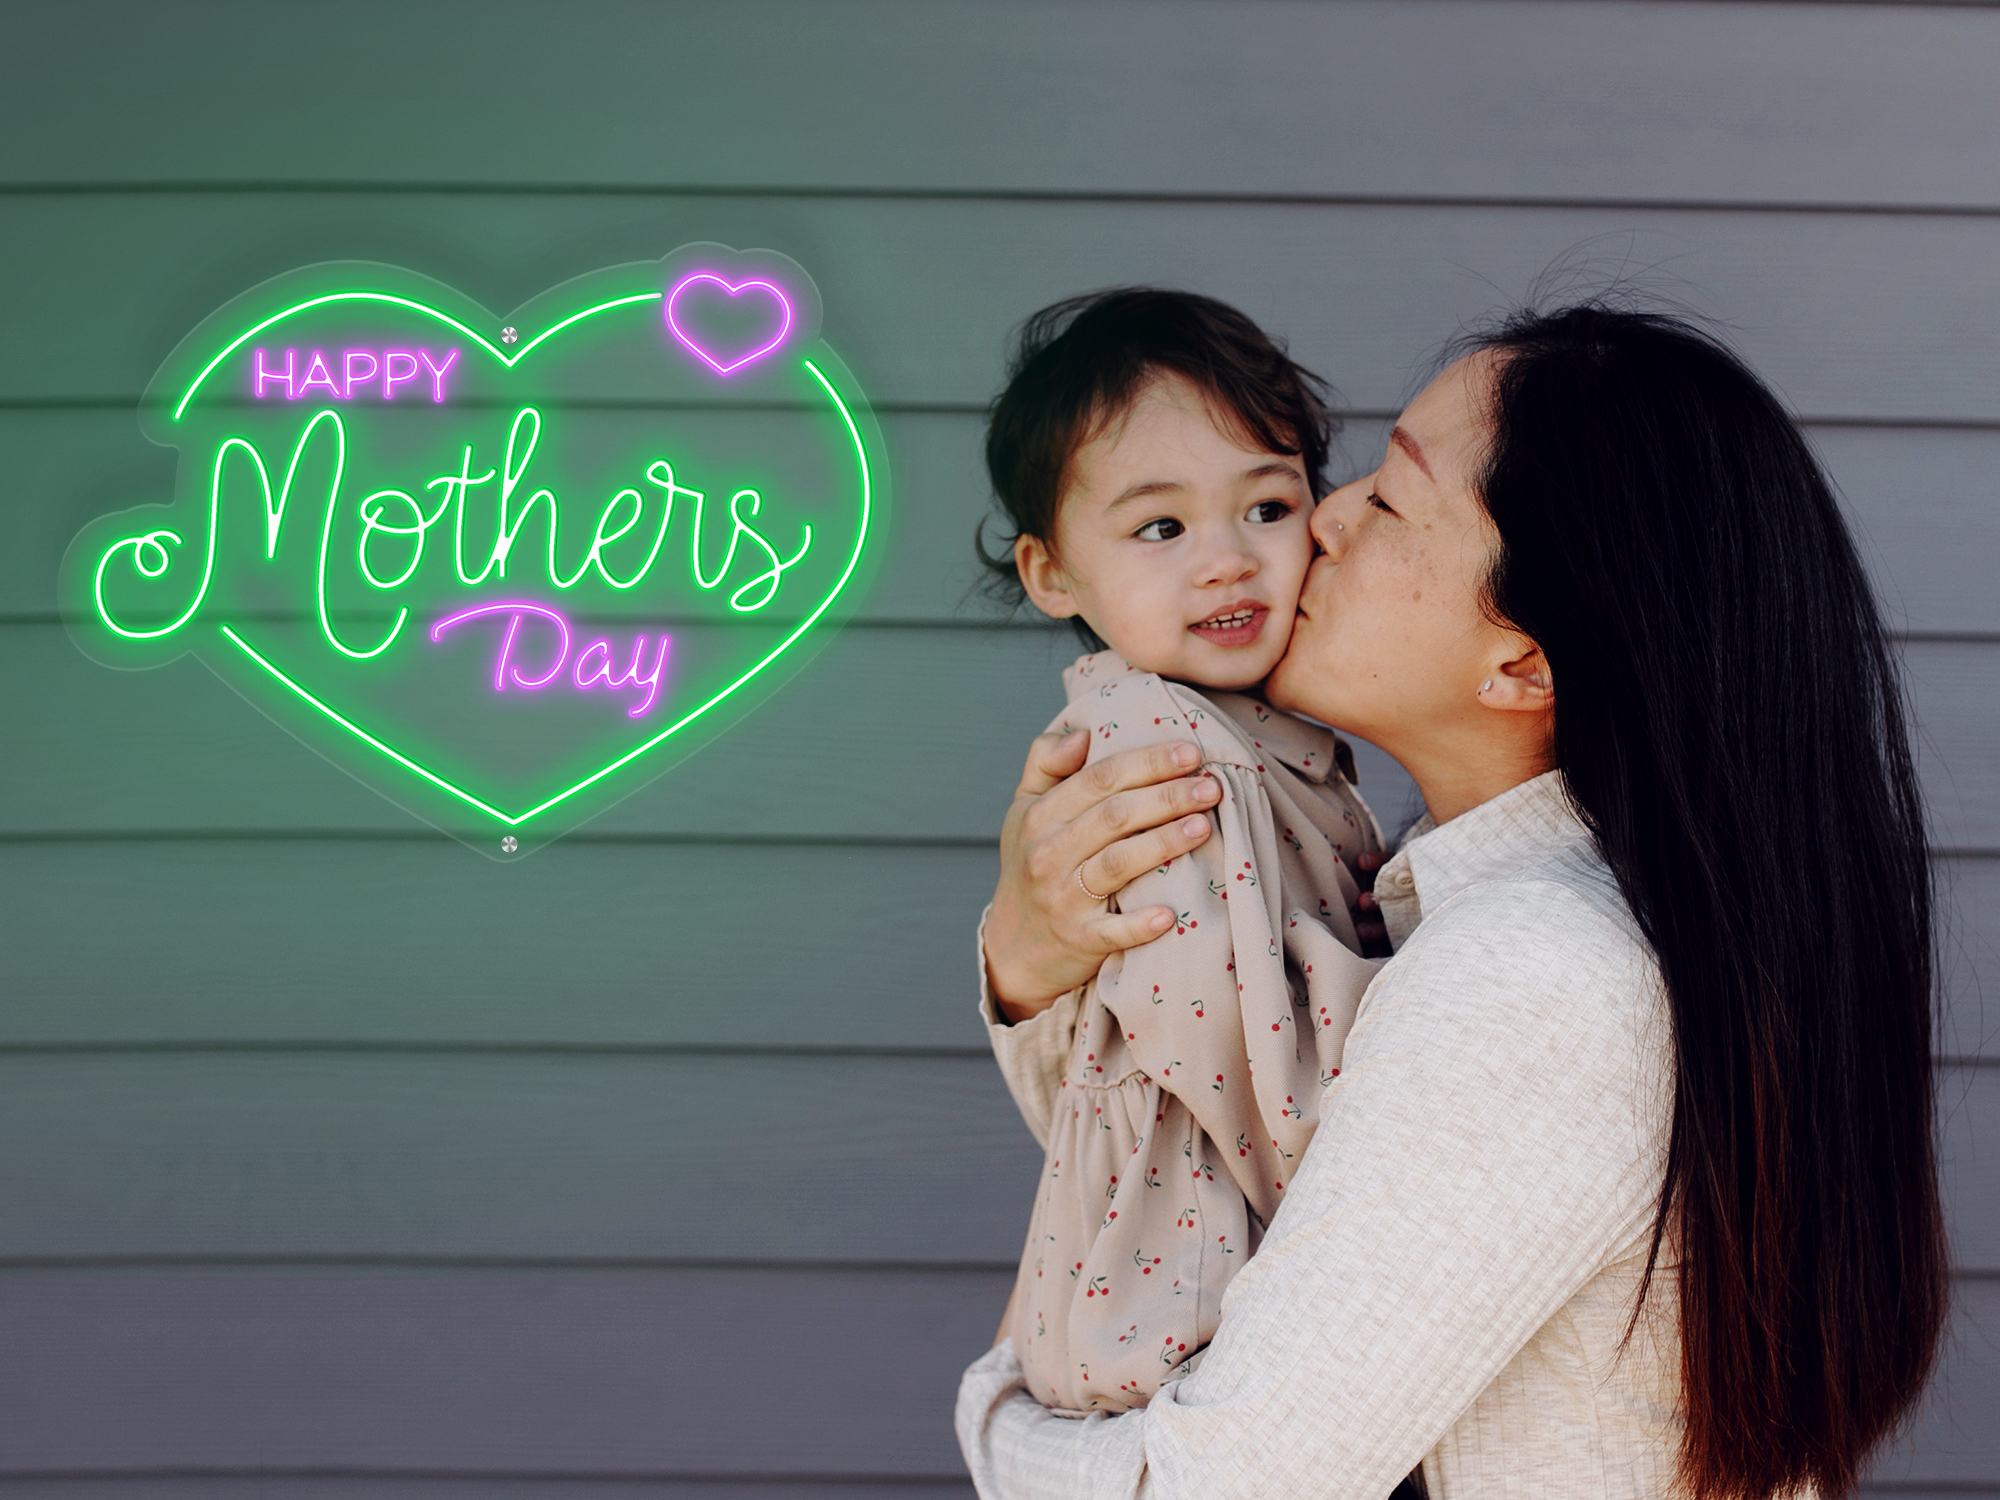 Give Your MOM an Unexpected Treat this Mother’s Day with a Custom-Designed Neon Present!